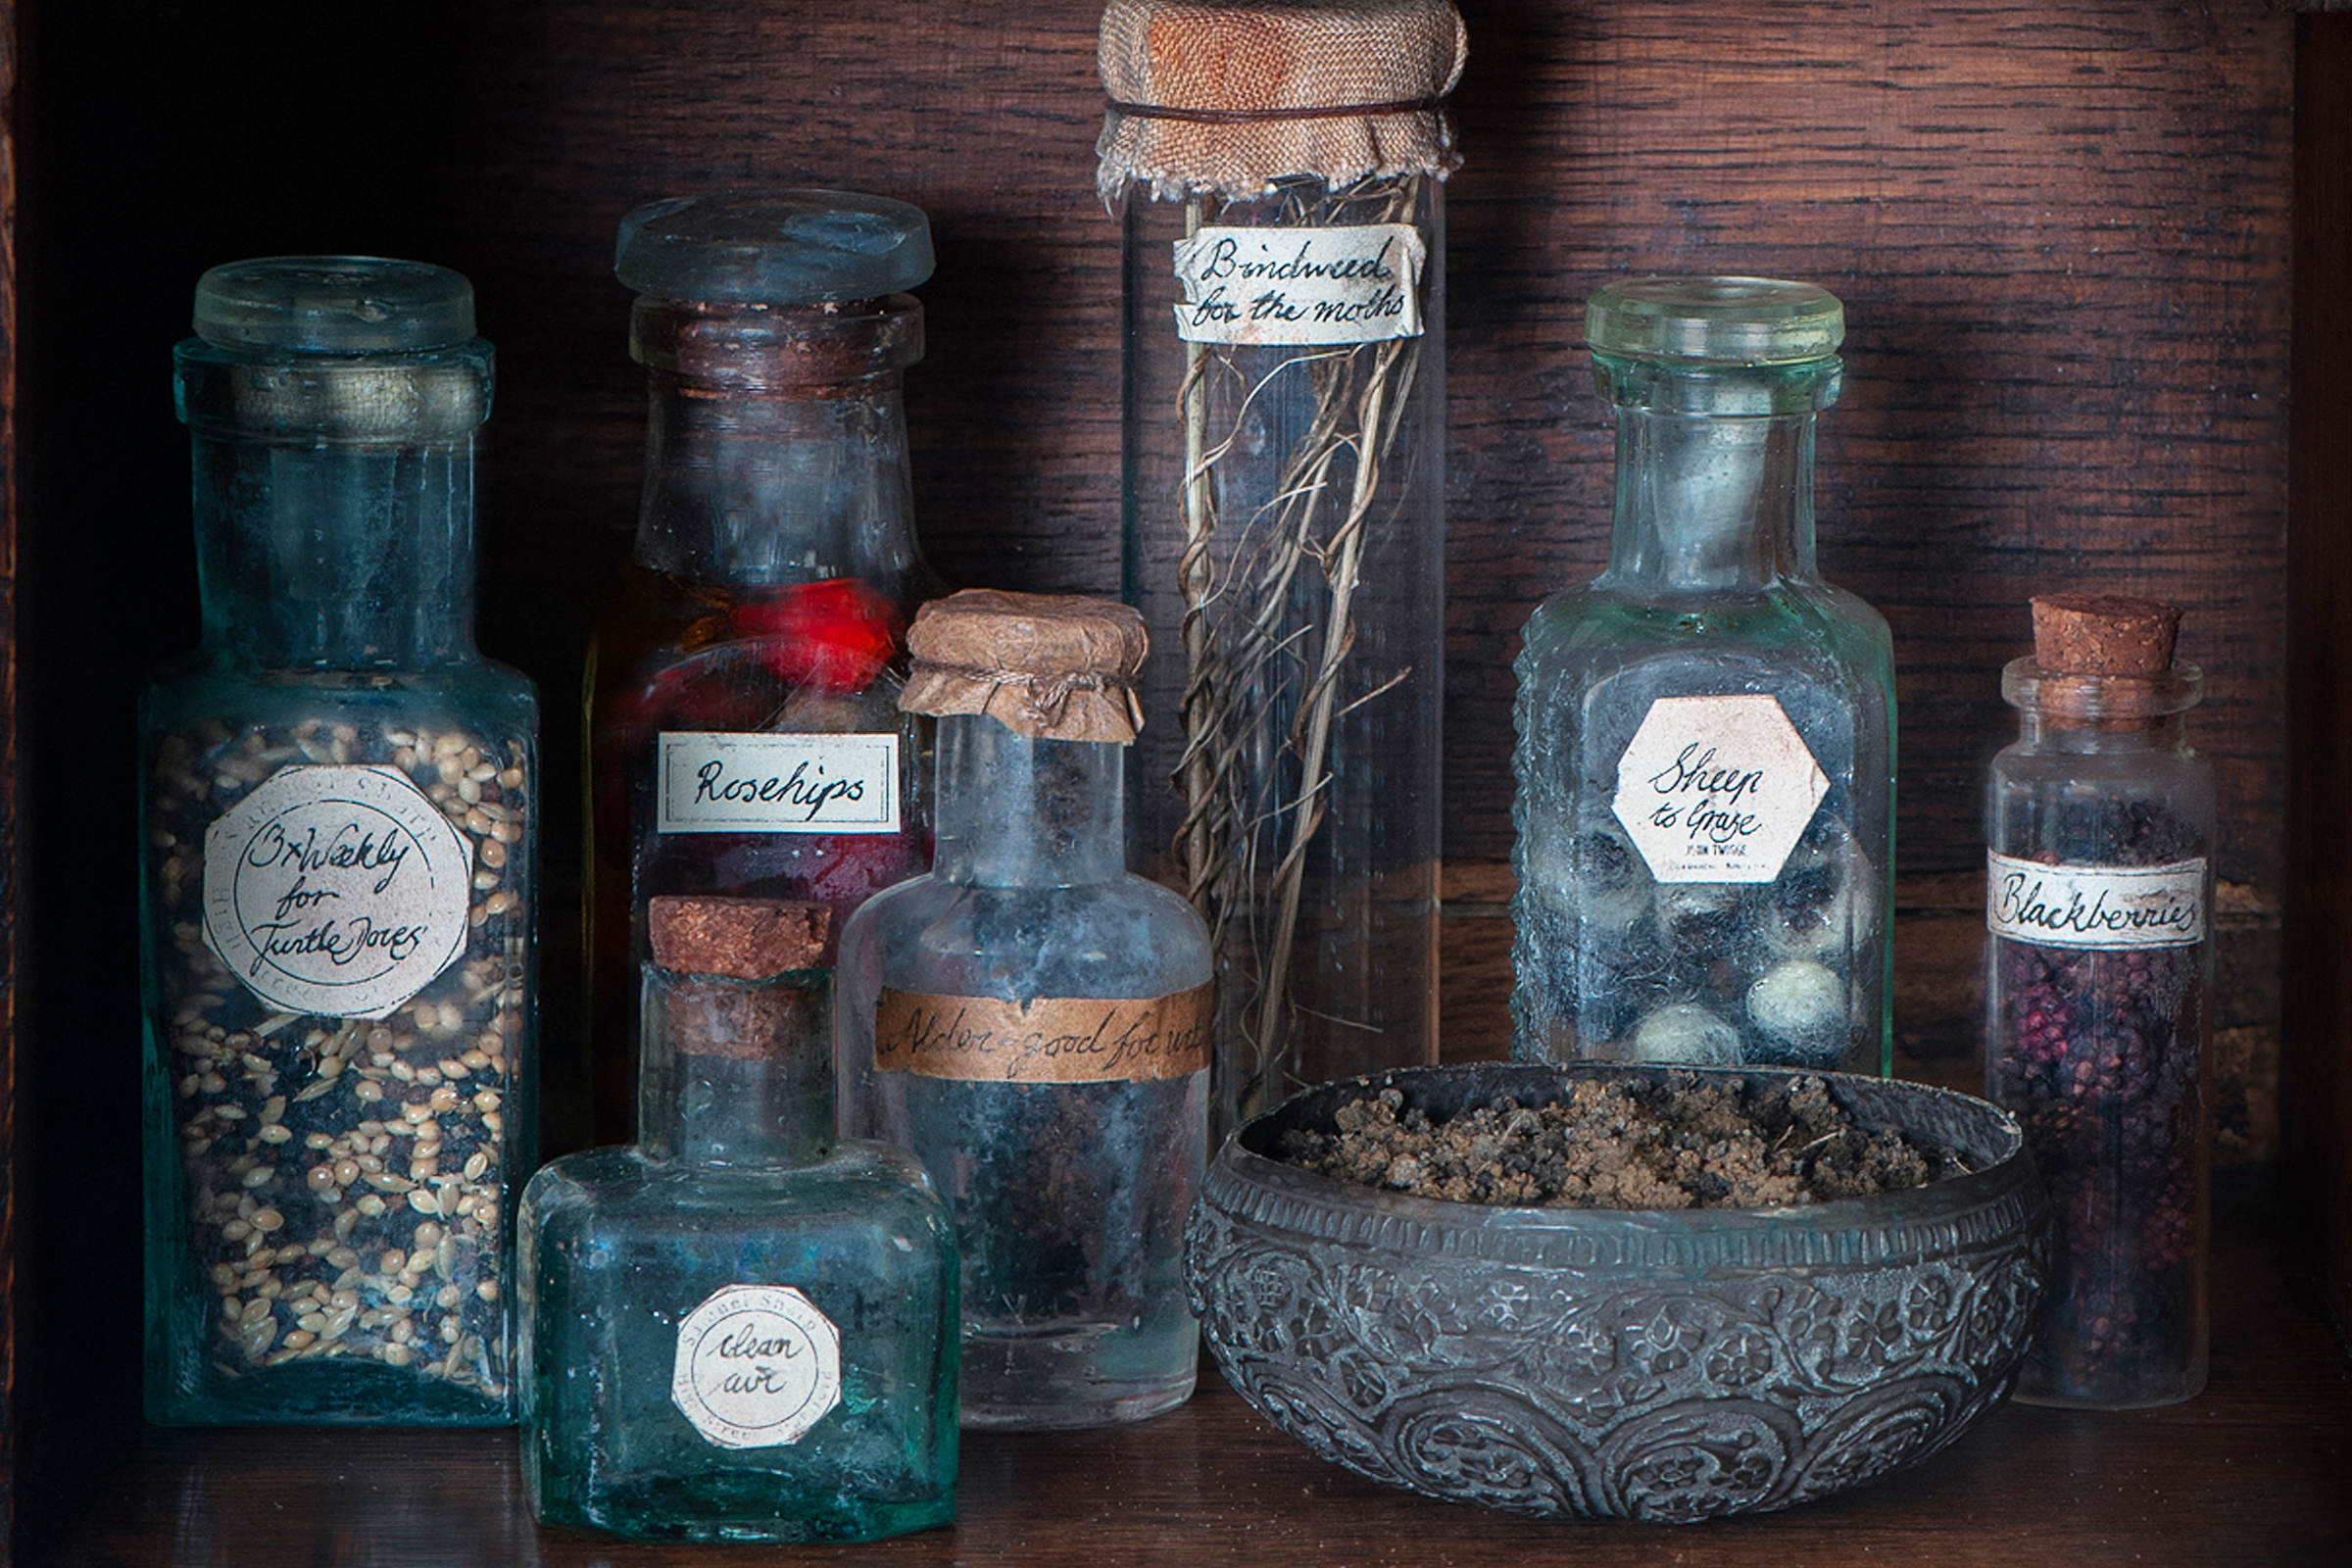 an old-fashioned wooden medicine cabinet. The door is open and inside are jars and pots. On top of the cabinet is a cream ceramic pot with willow branches in it, plus two small glass containers.